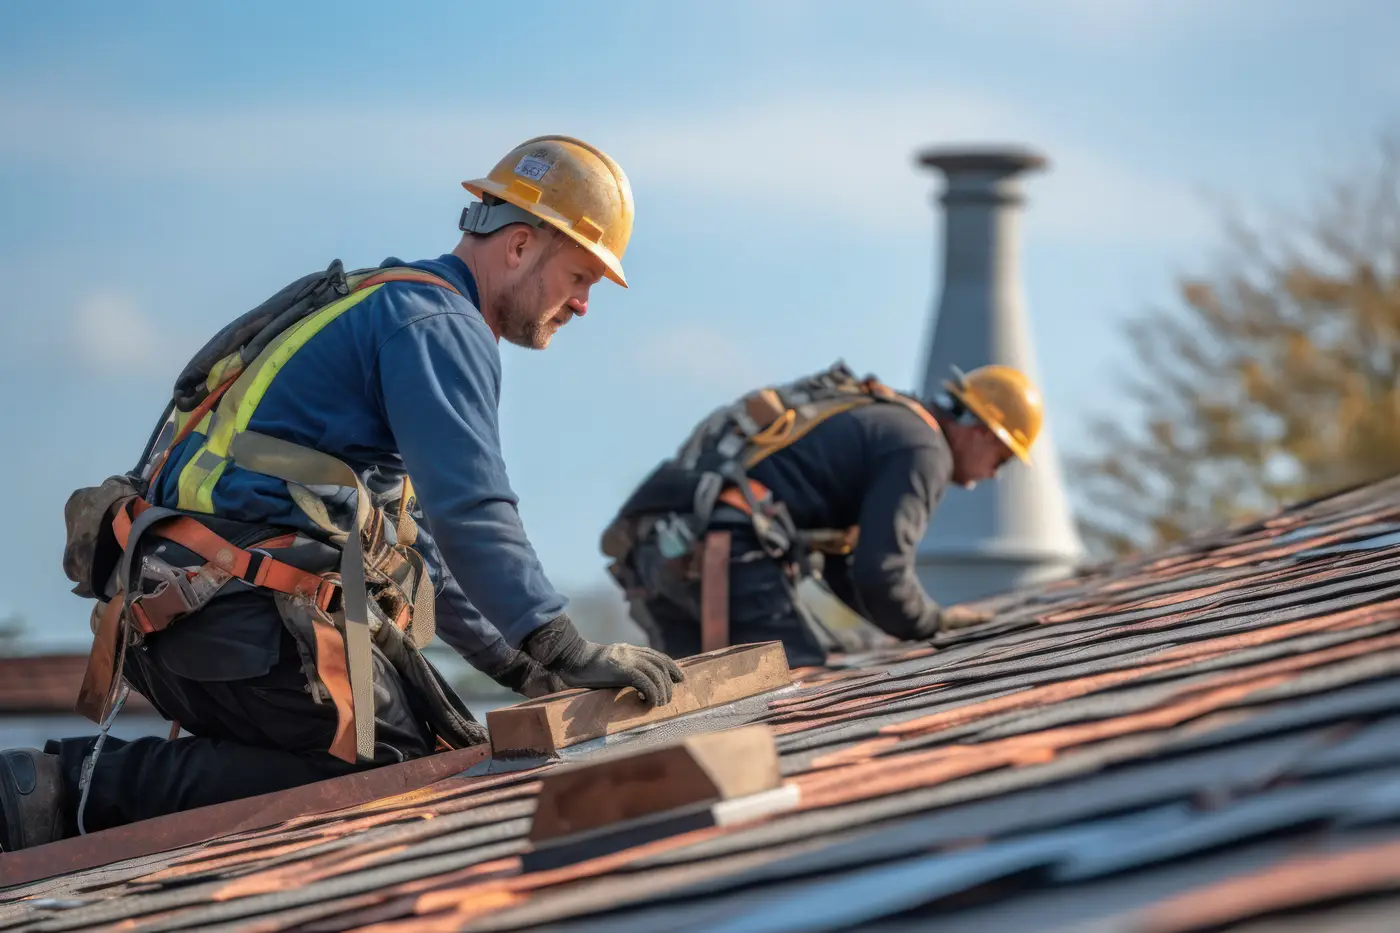 Roofers in hard hats repairing roof shingles